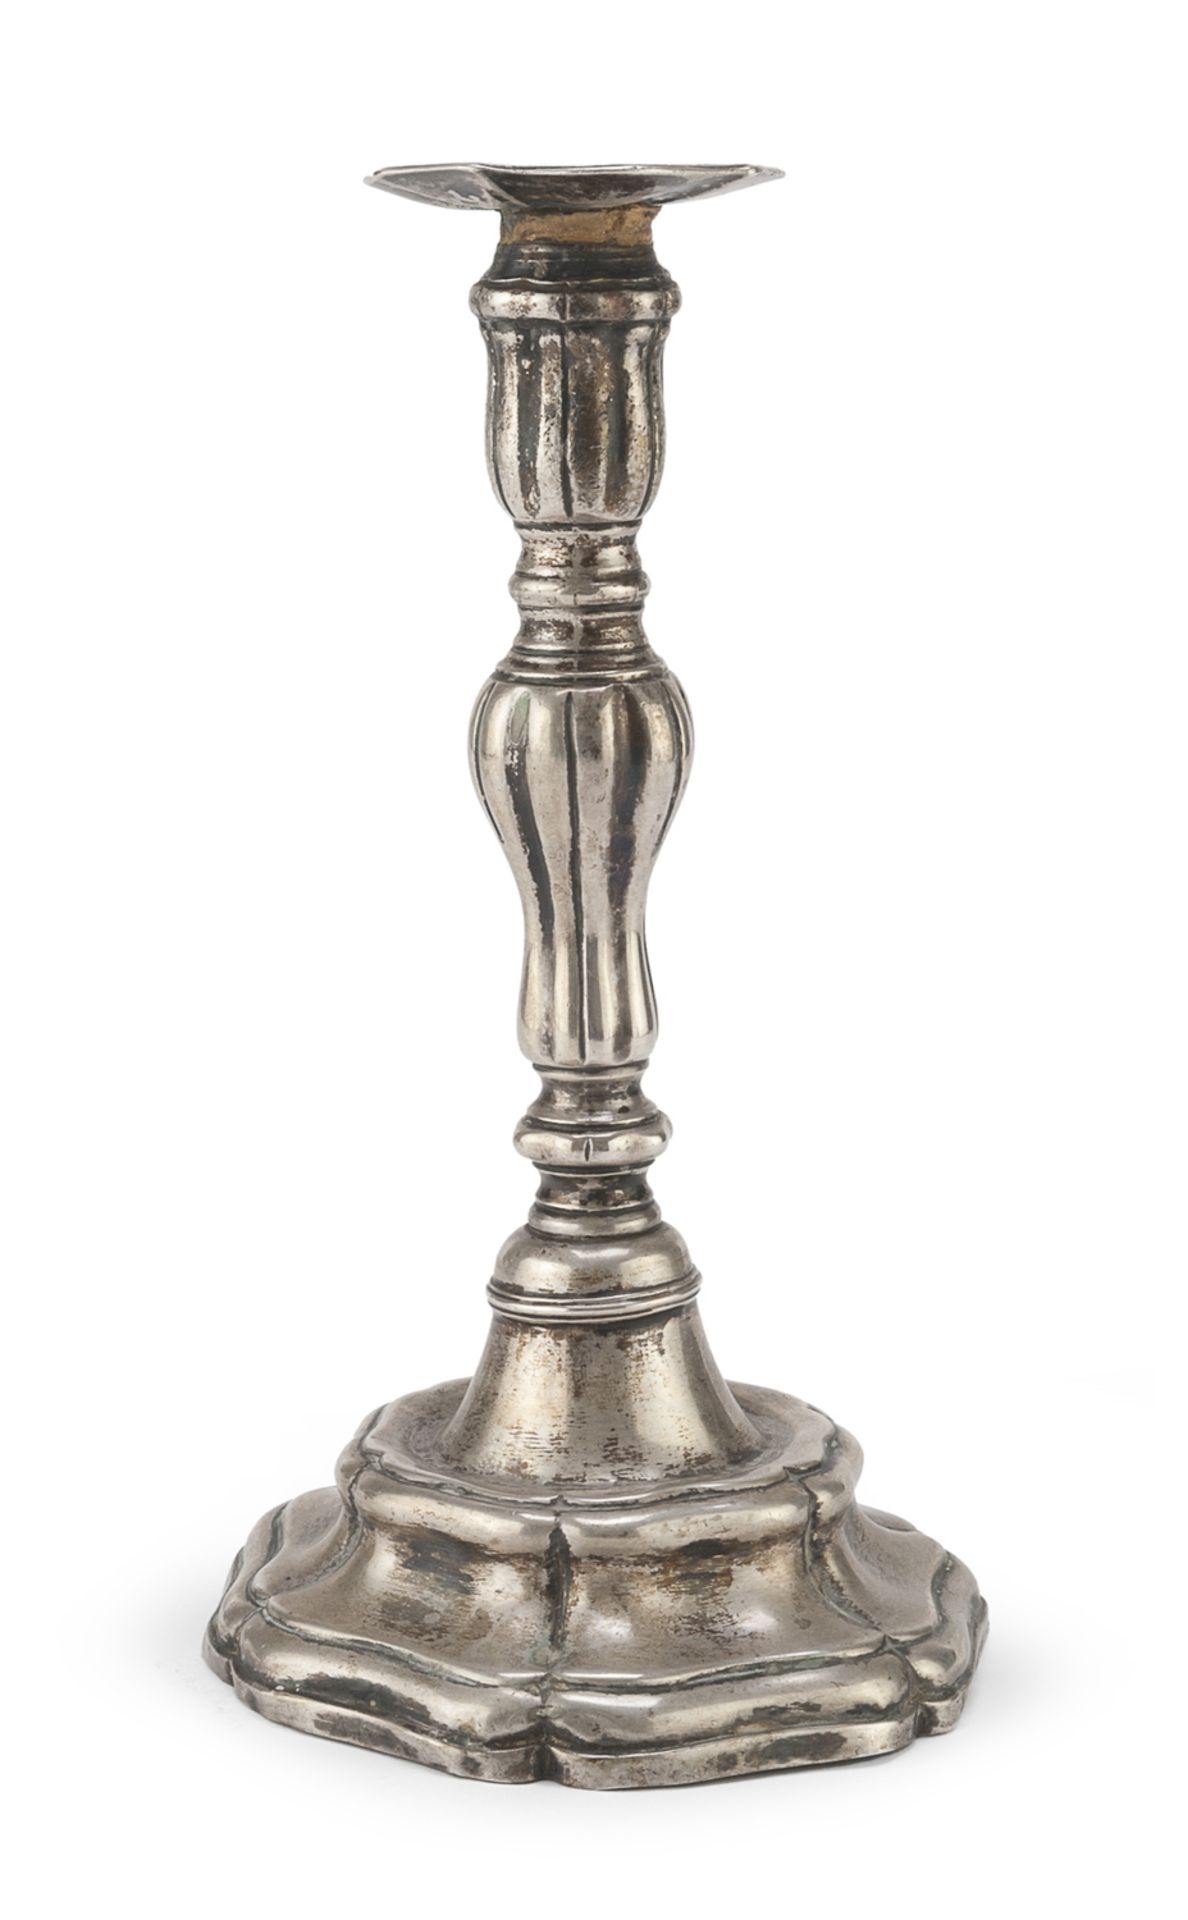 SILVER CANDLESTICK ADOLPHE FREMONT FRANCE 19TH CENTURY